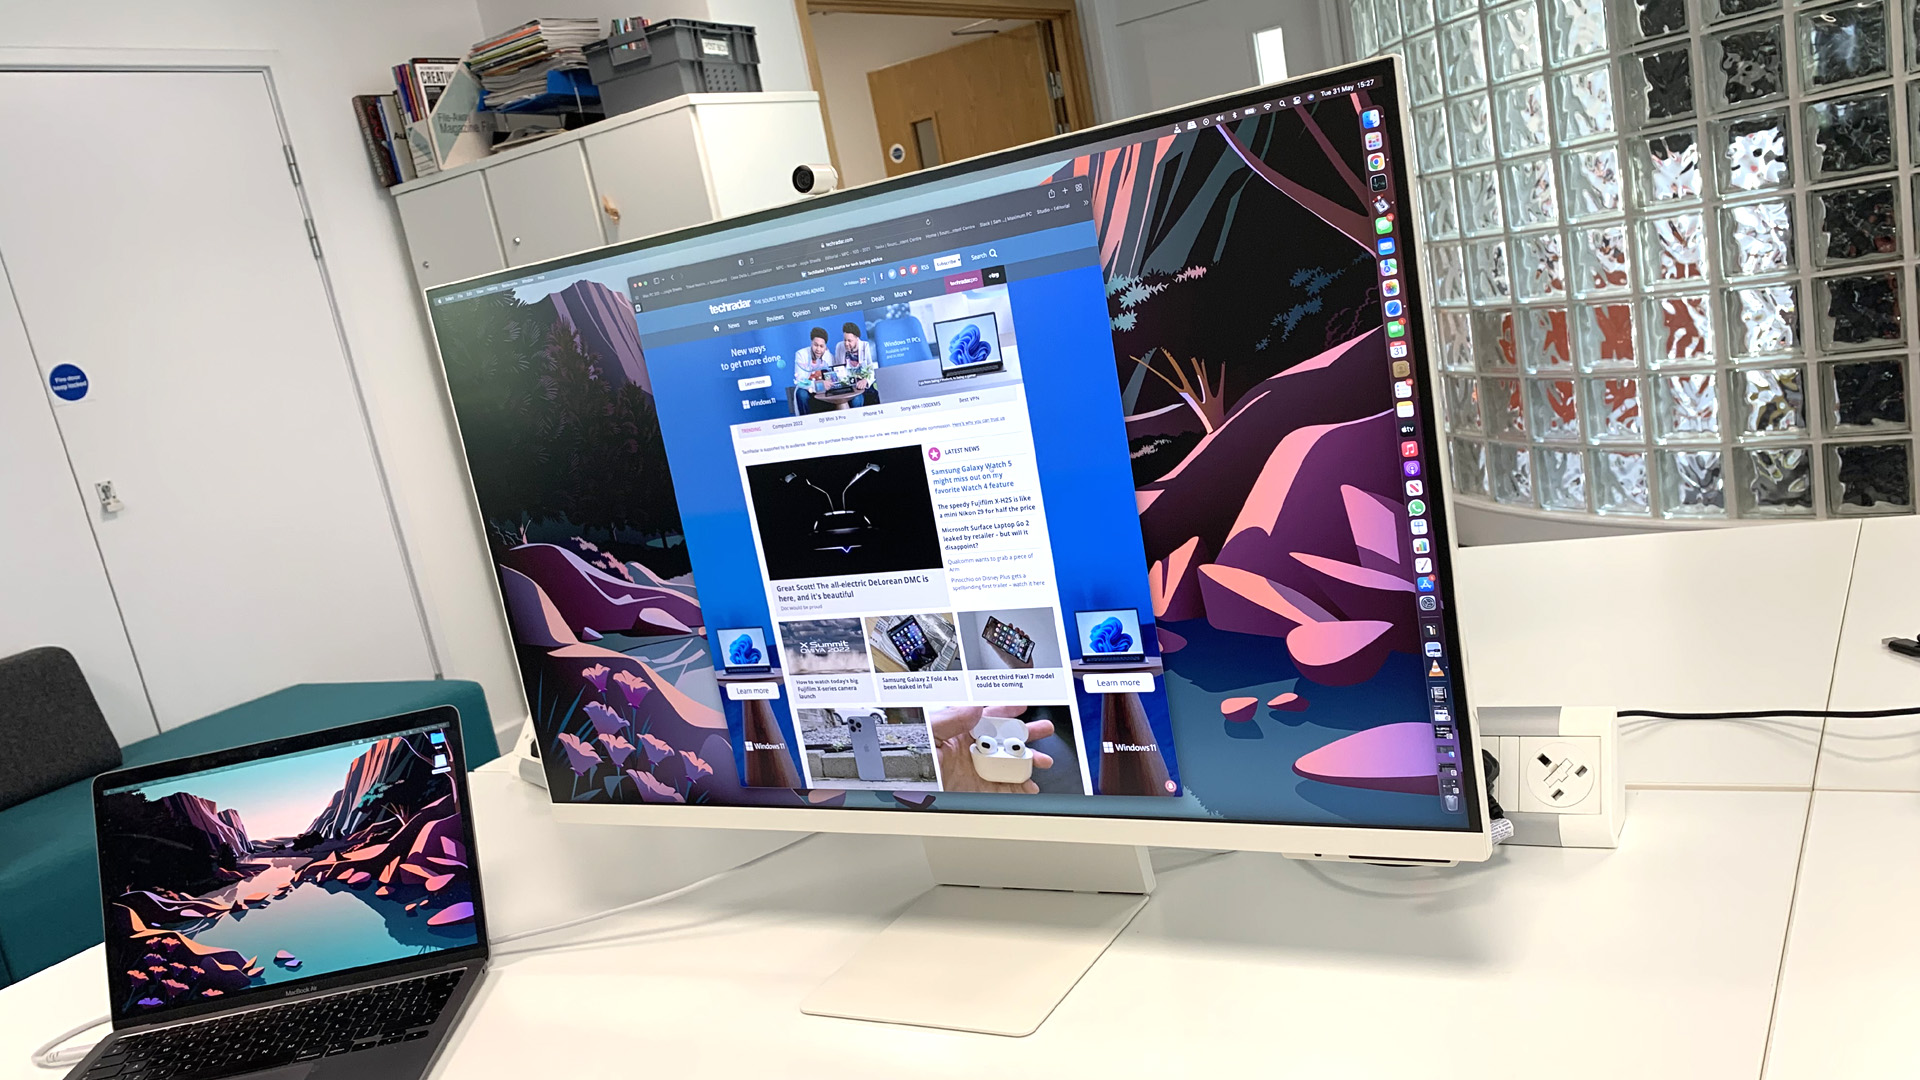 Samsung's new Smart Monitor M8 is the next best thing to a 32-inch iMac